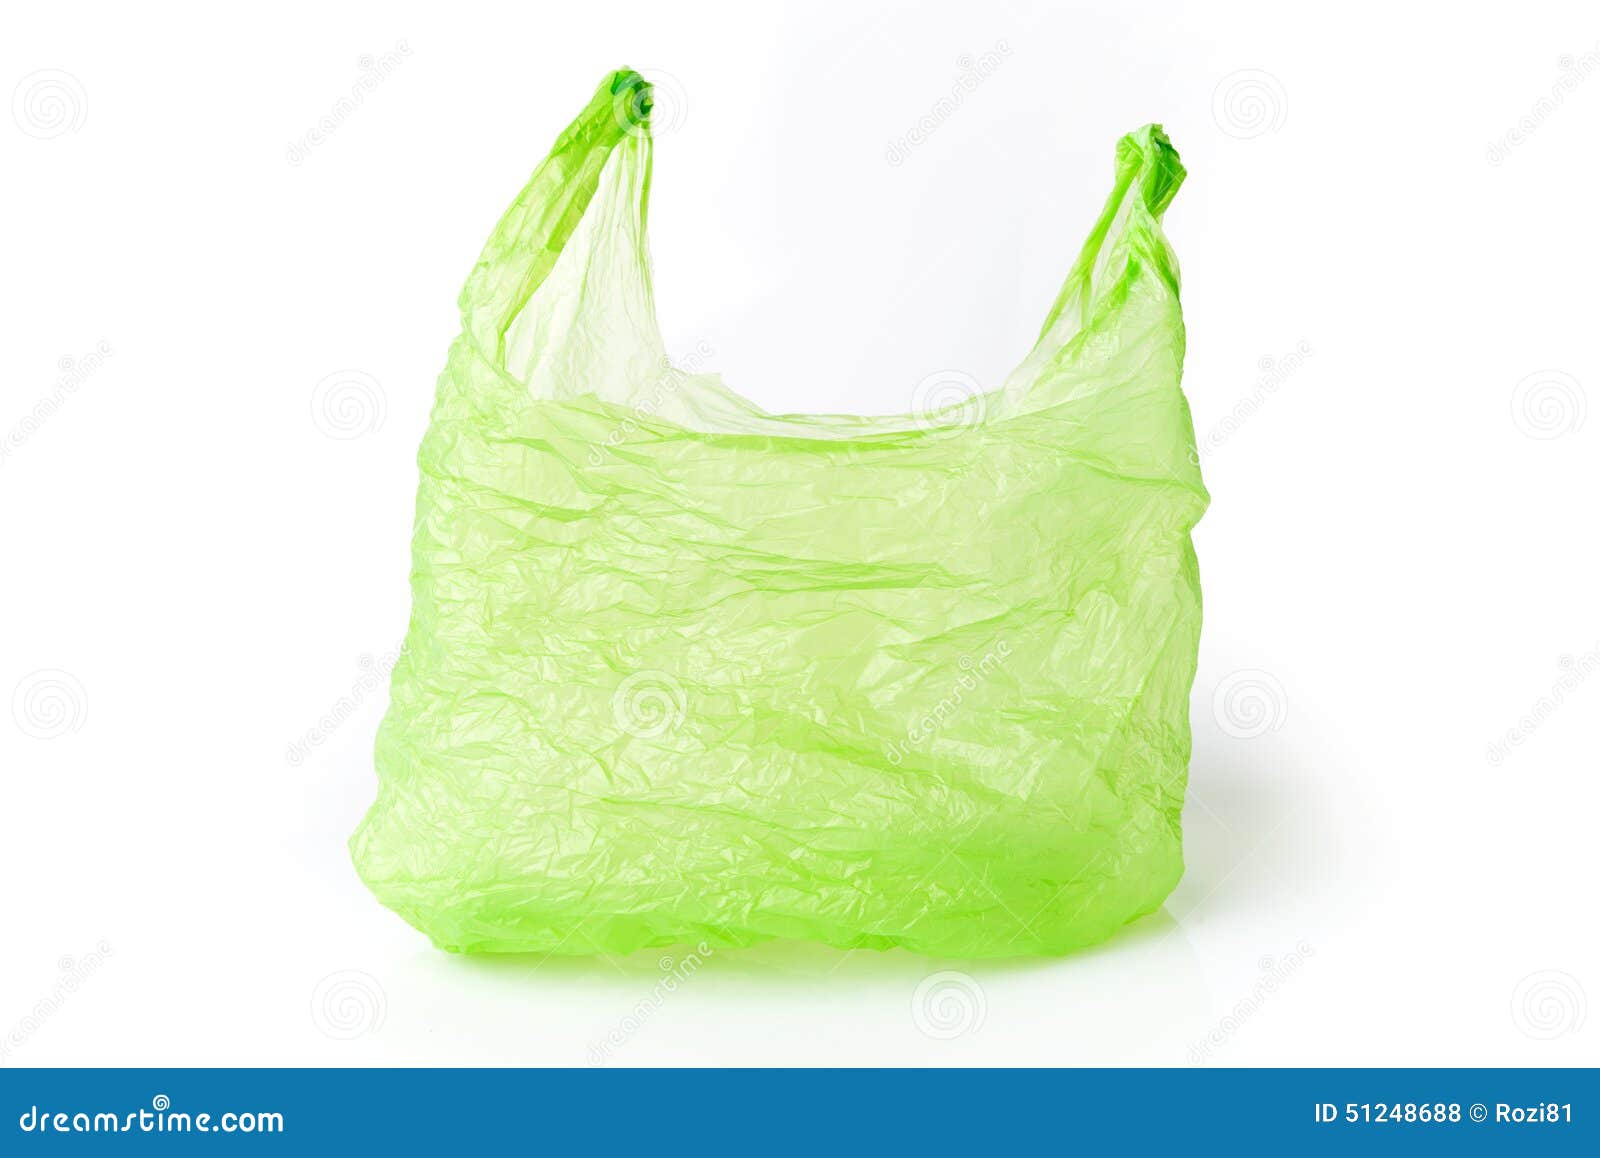 Green plastic bag isolated stock photo. Image of hanging - 51248688